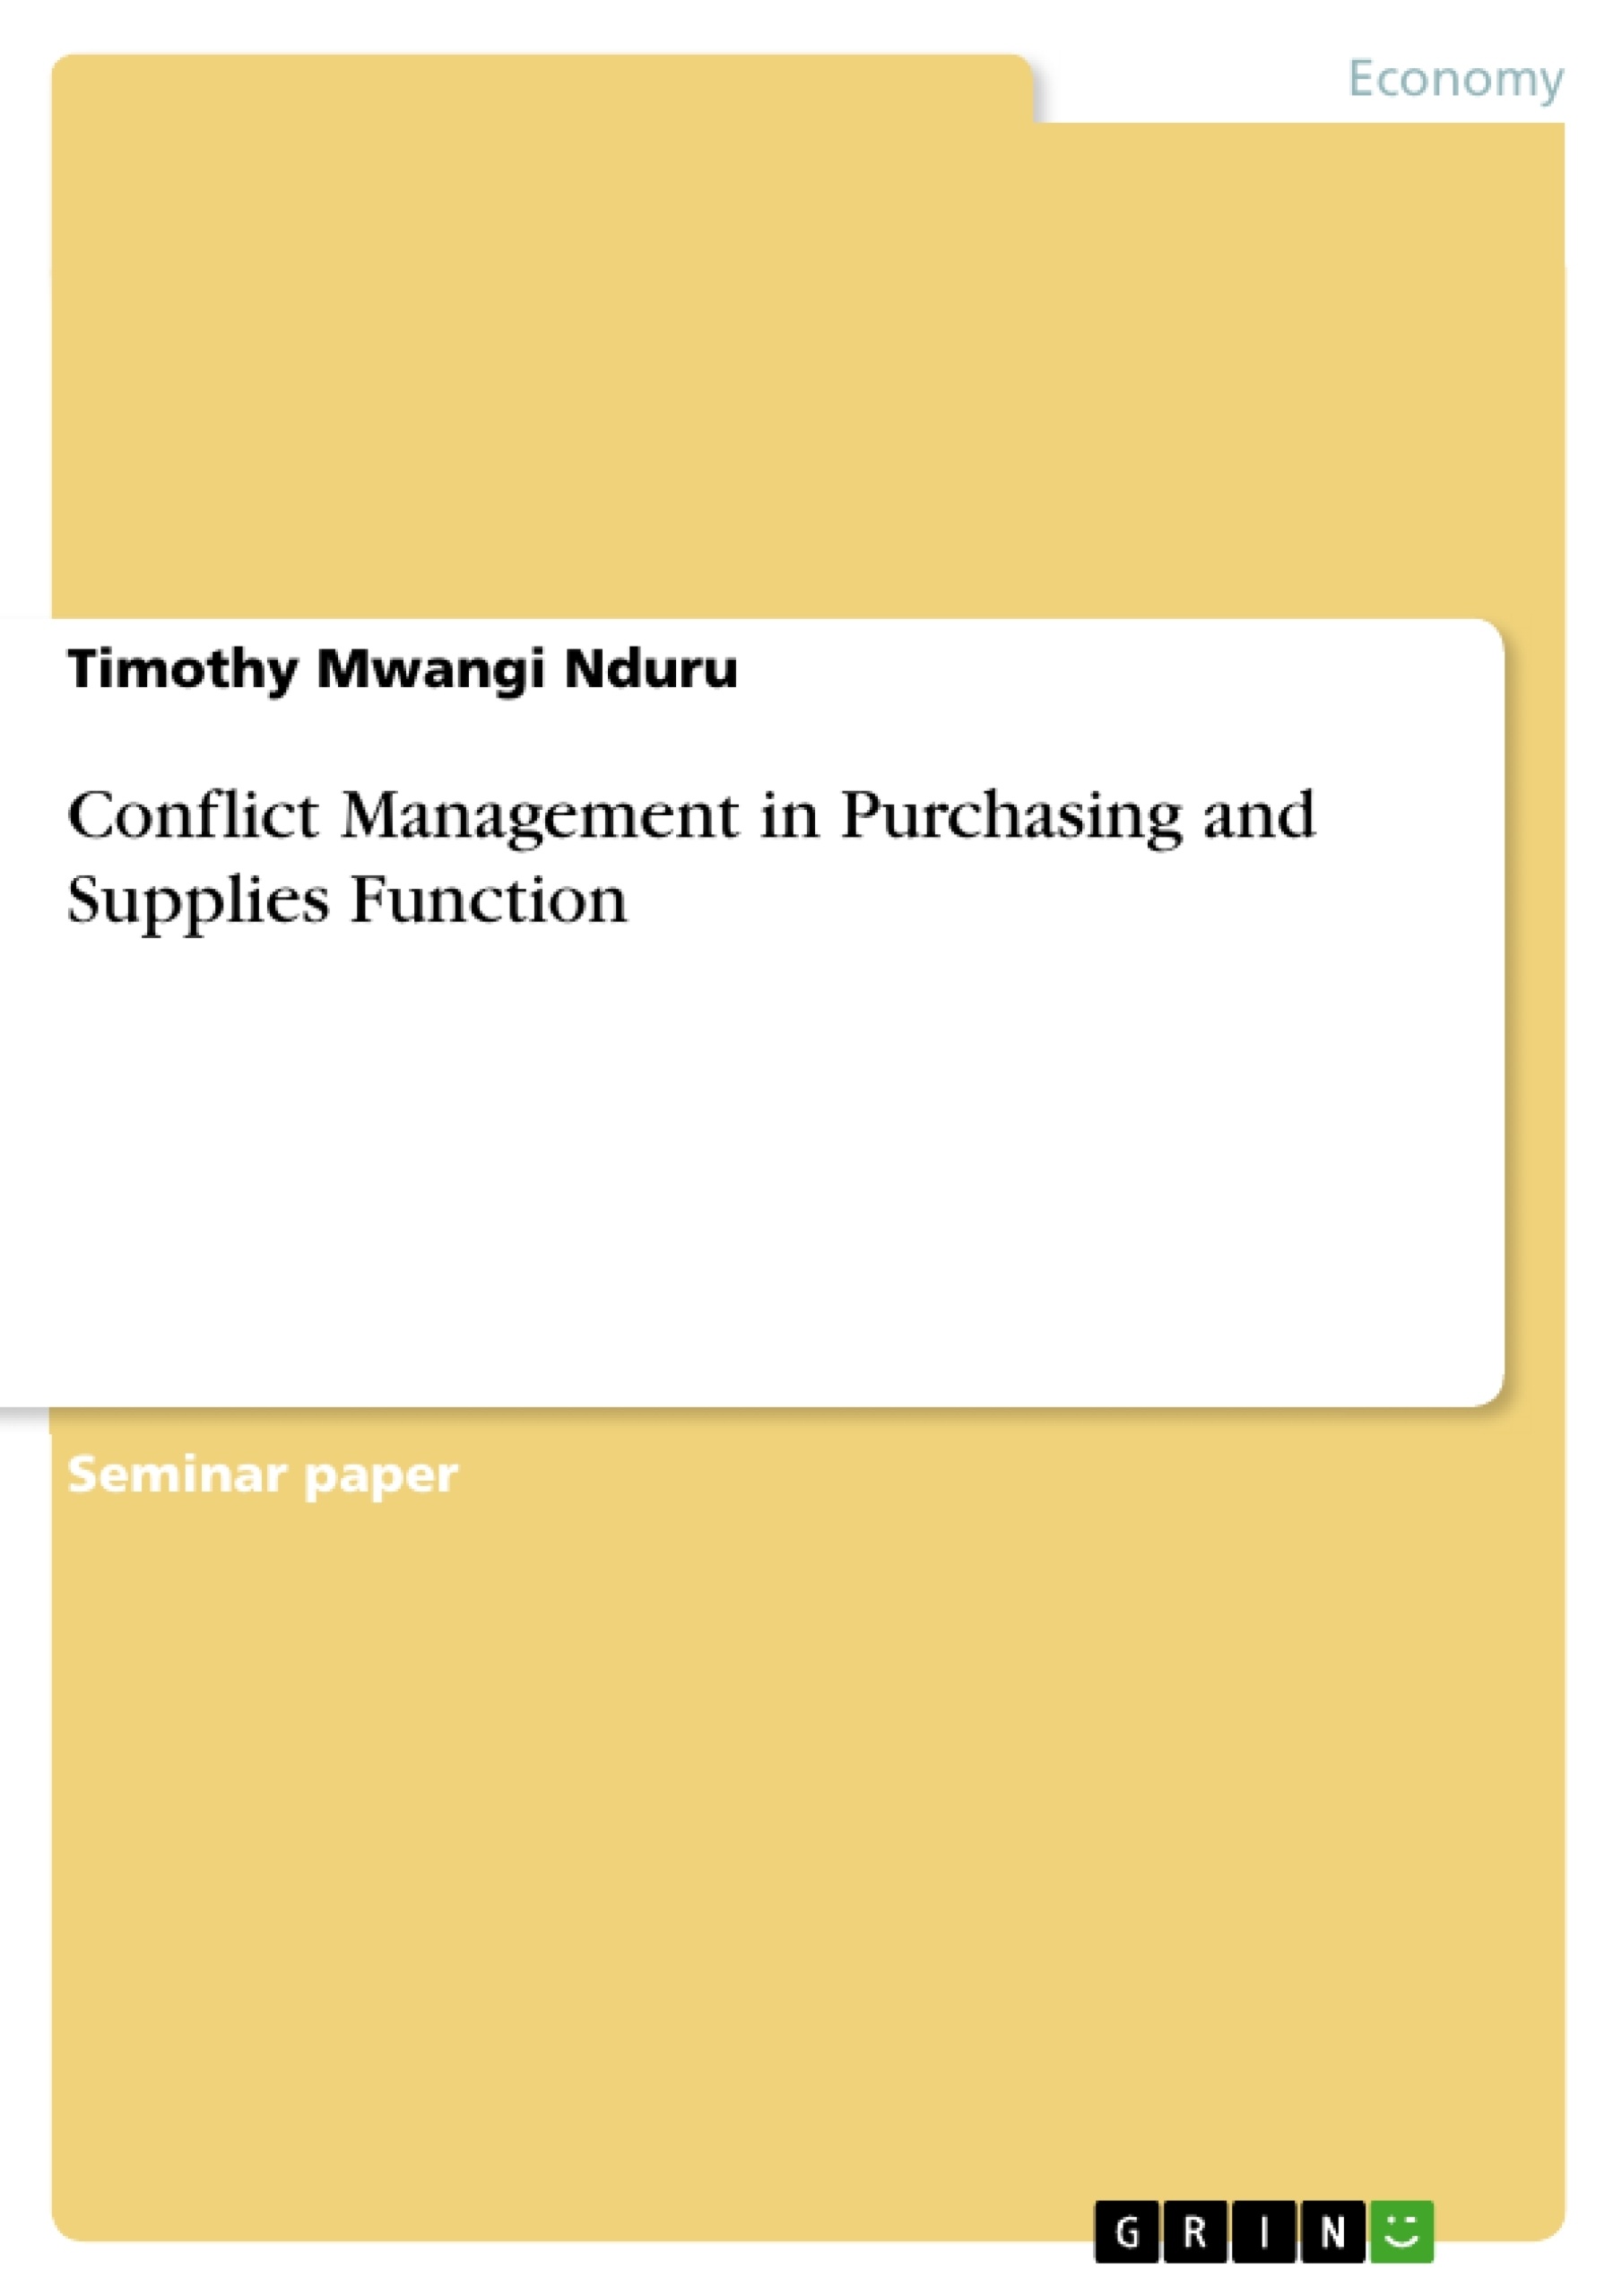 Title: Conflict Management in Purchasing and Supplies Function